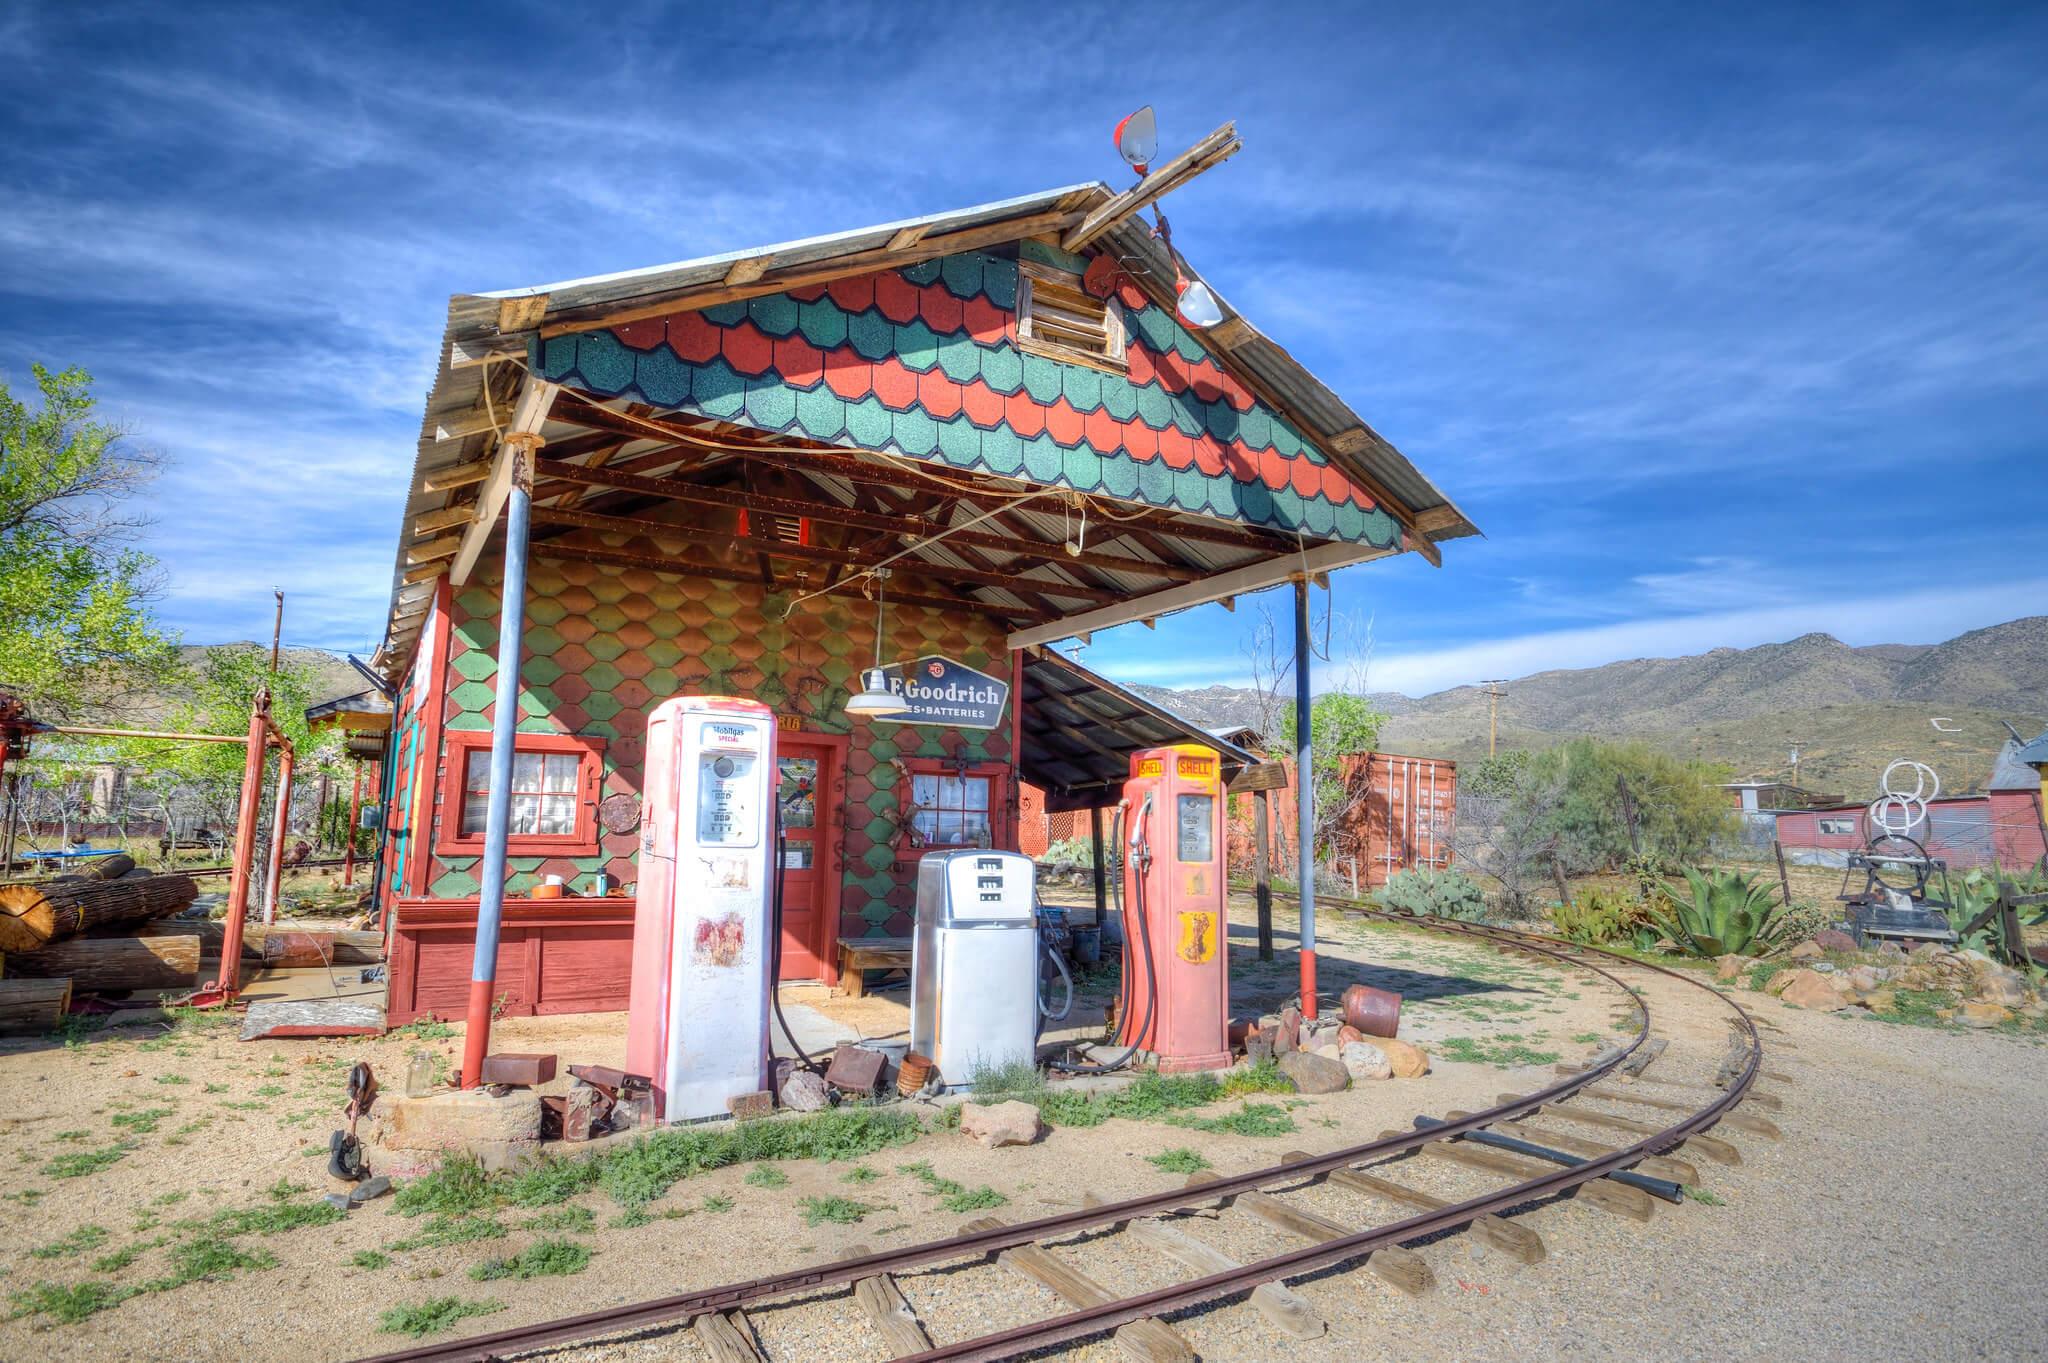 Colorful gas station in Chloride, AZ.
Flickr User ap0013